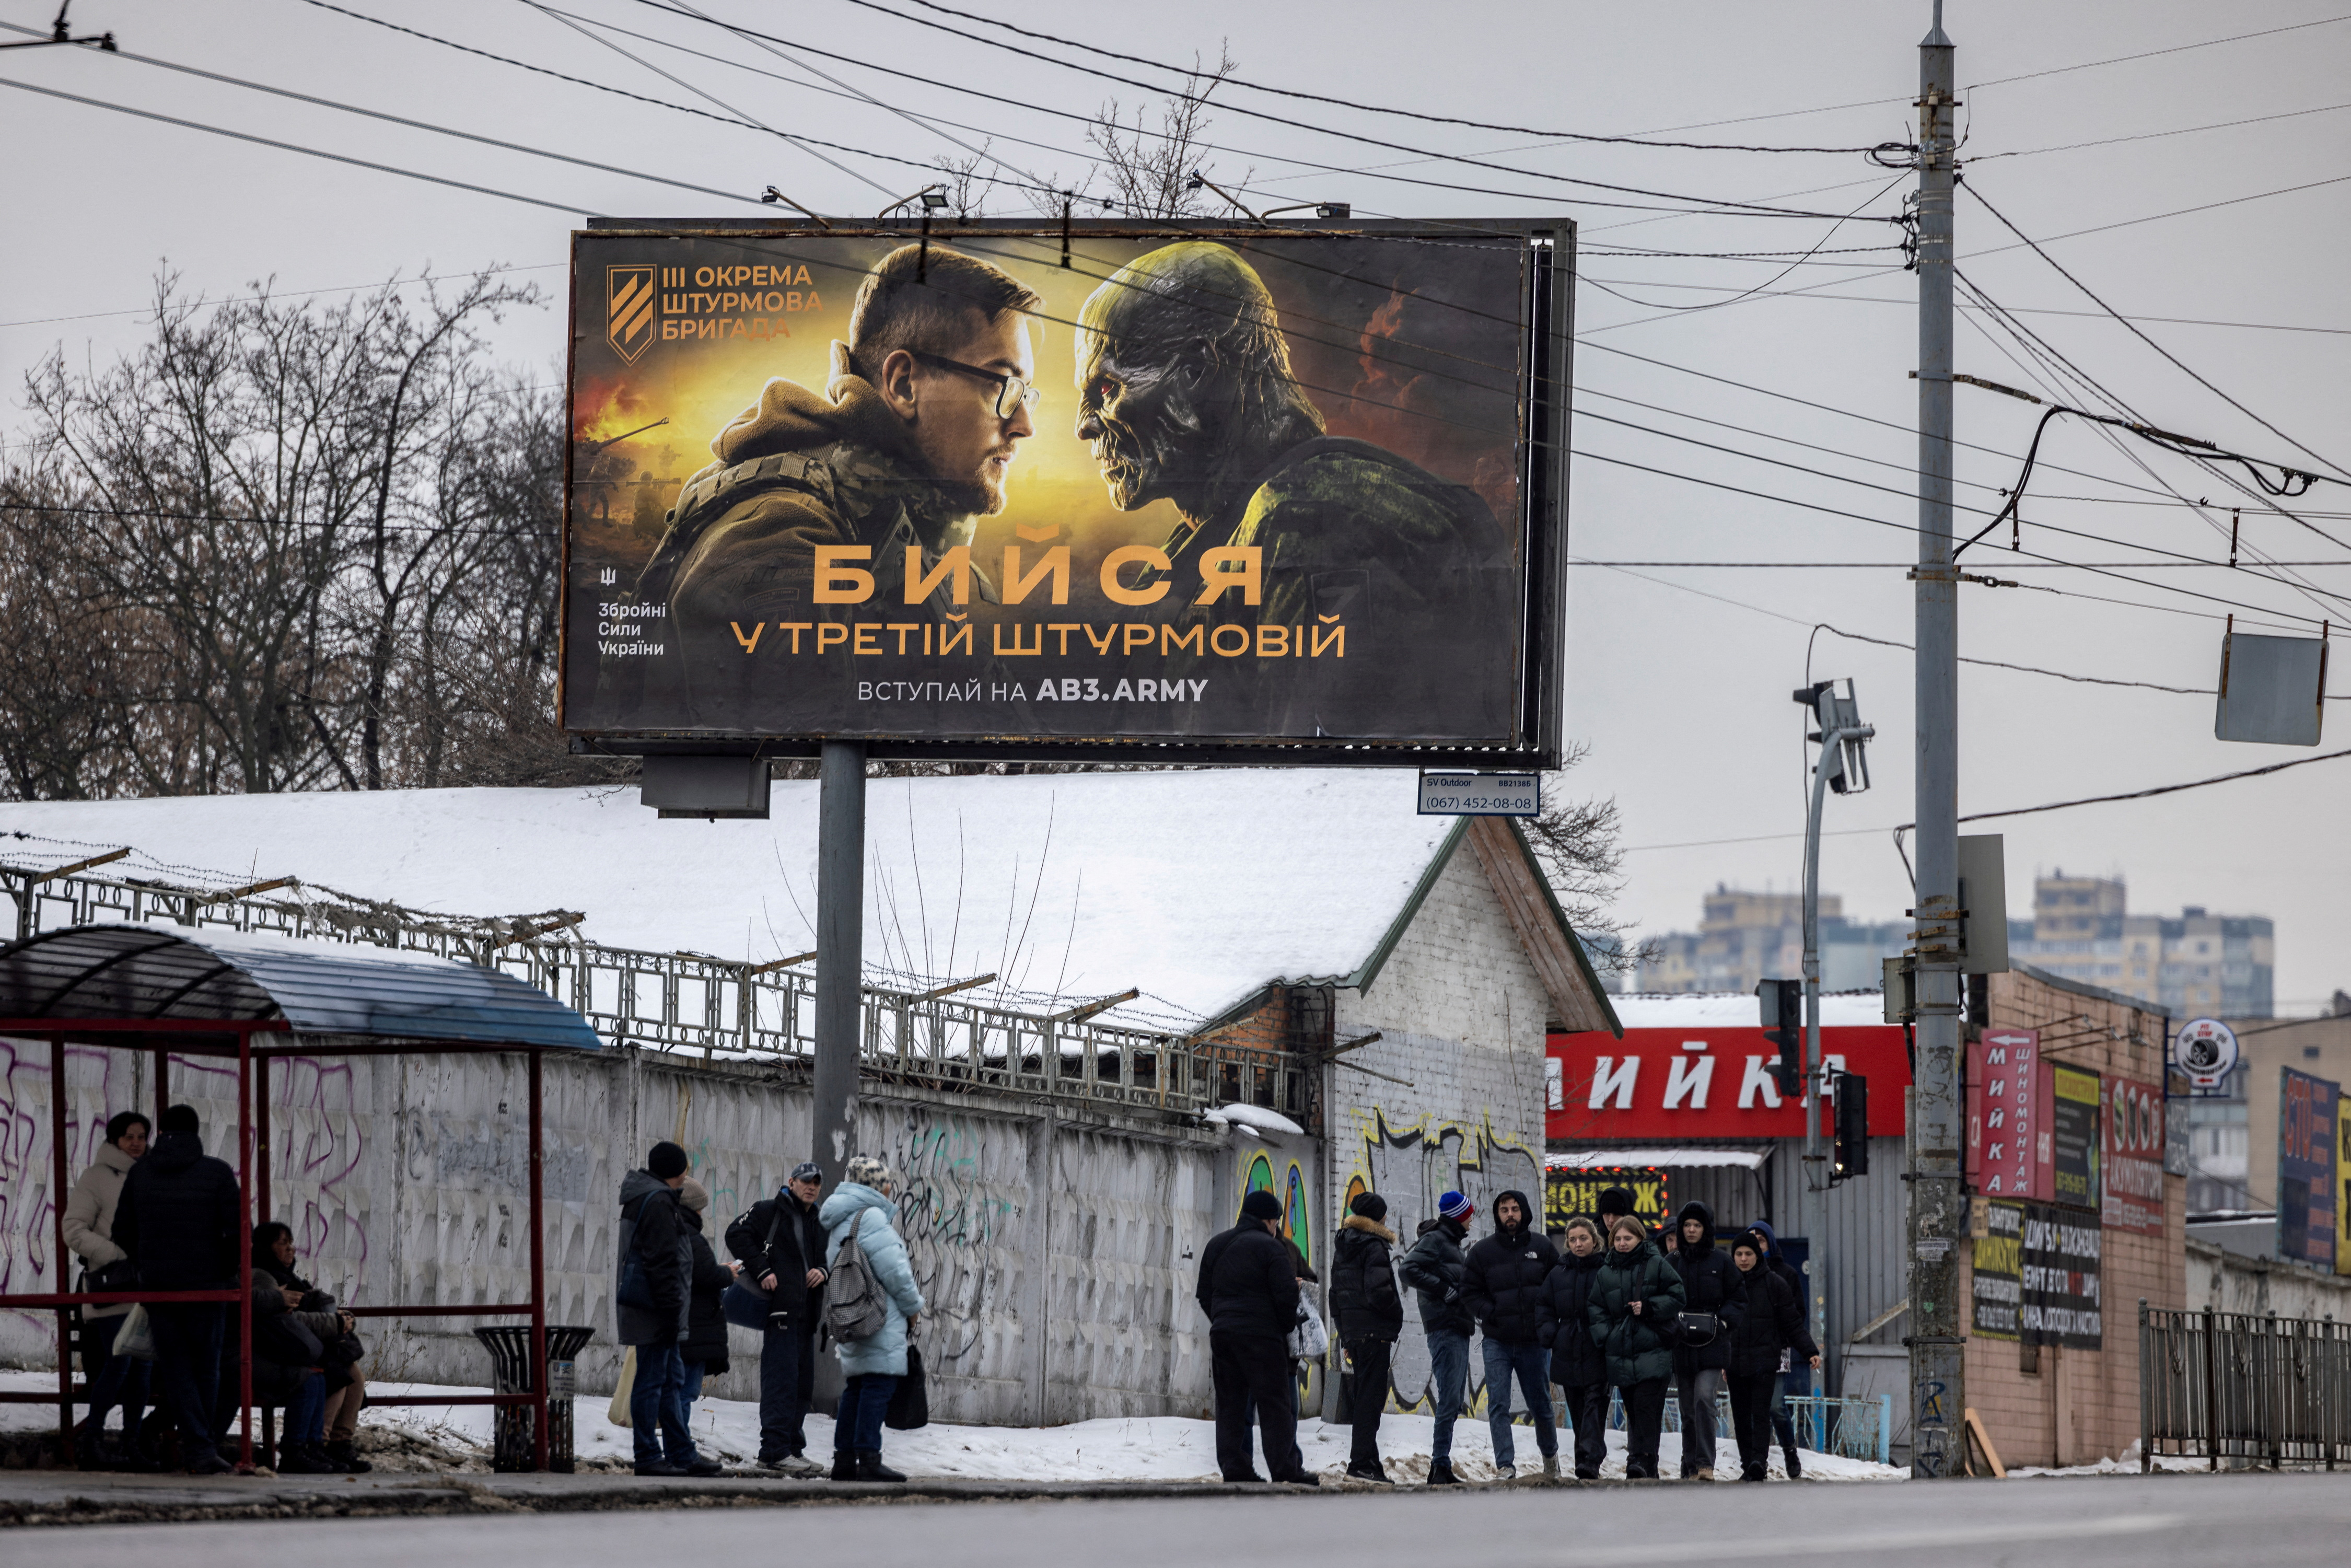 People walk past a poster advertising the 3rd Separate Assault Brigade of the Ukrainian Ground Forces in Kyiv